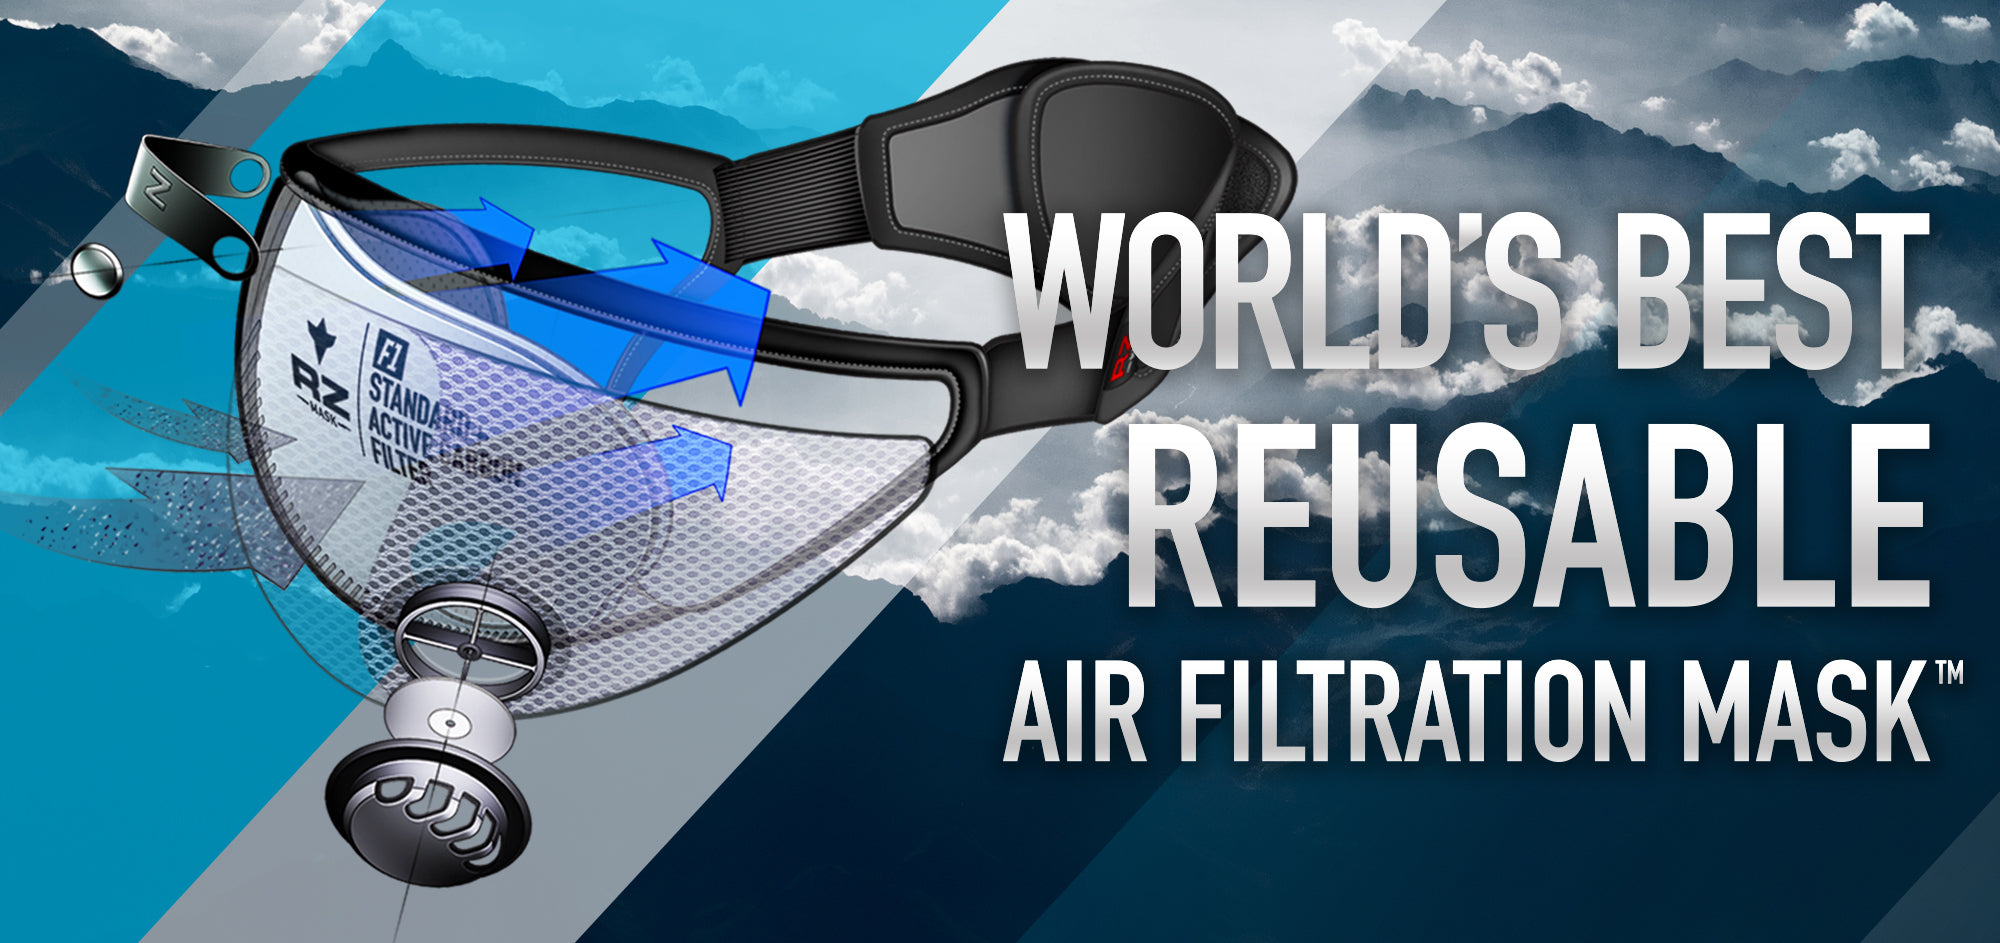 World's Best Reusable Air Filtration Mask - Image of the RZ Mask